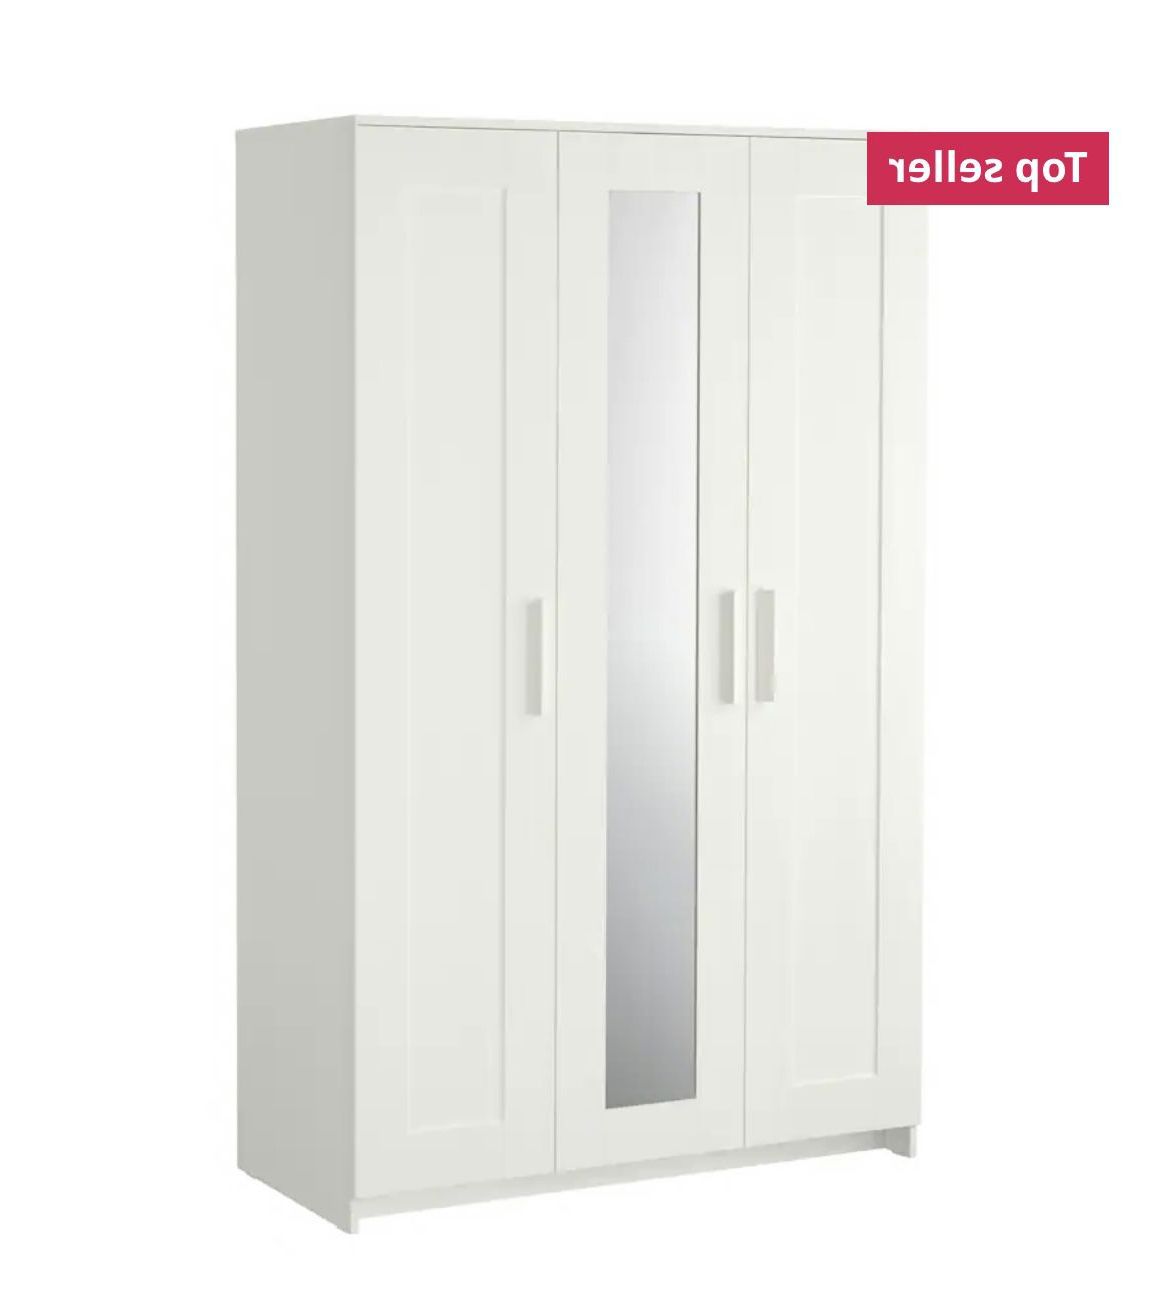 Ikea Brimnes 3 Door Wardrobe W/ Mirror (2 Available) – $175/each For Sale  In Brooklyn, Ny – Offerup Pertaining To White 3 Door Wardrobes With Mirror (View 15 of 20)